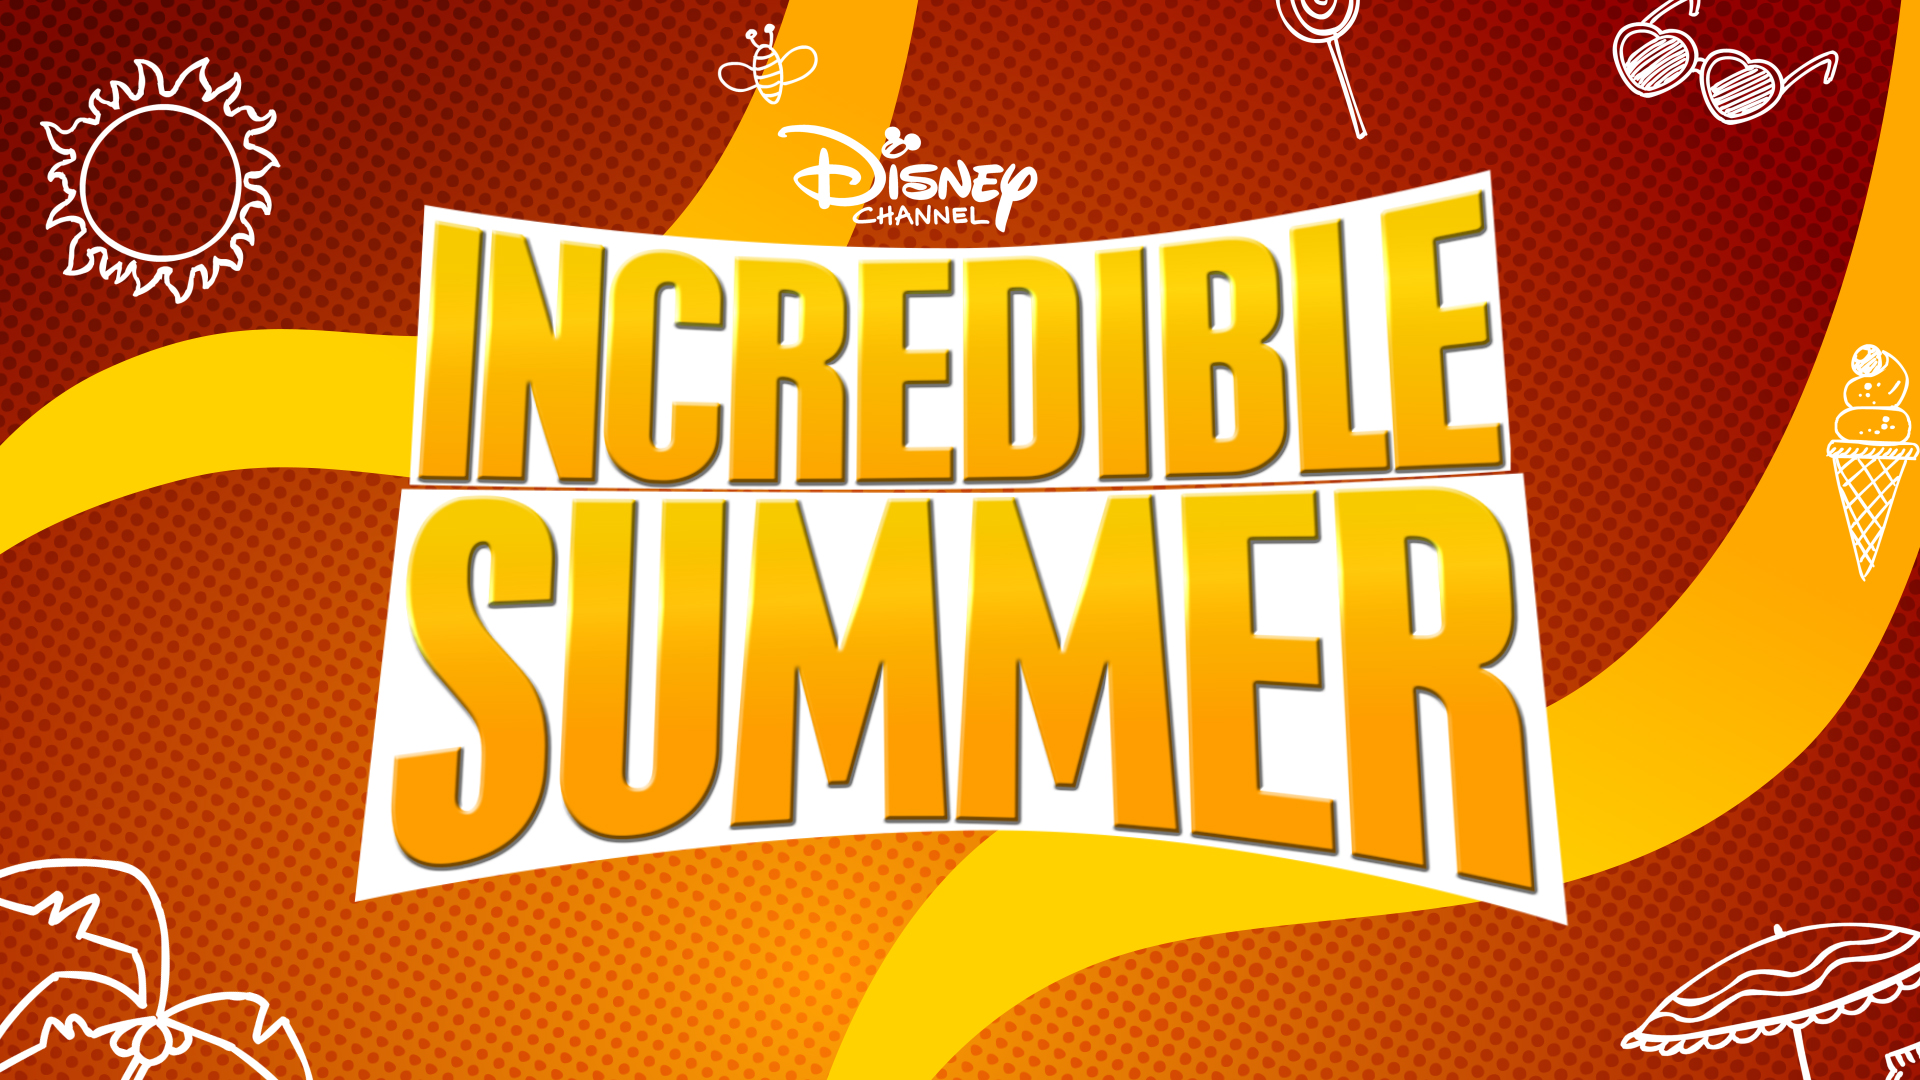 INCREDIBLE SUMMER ON THE DISNEY CHANNEL